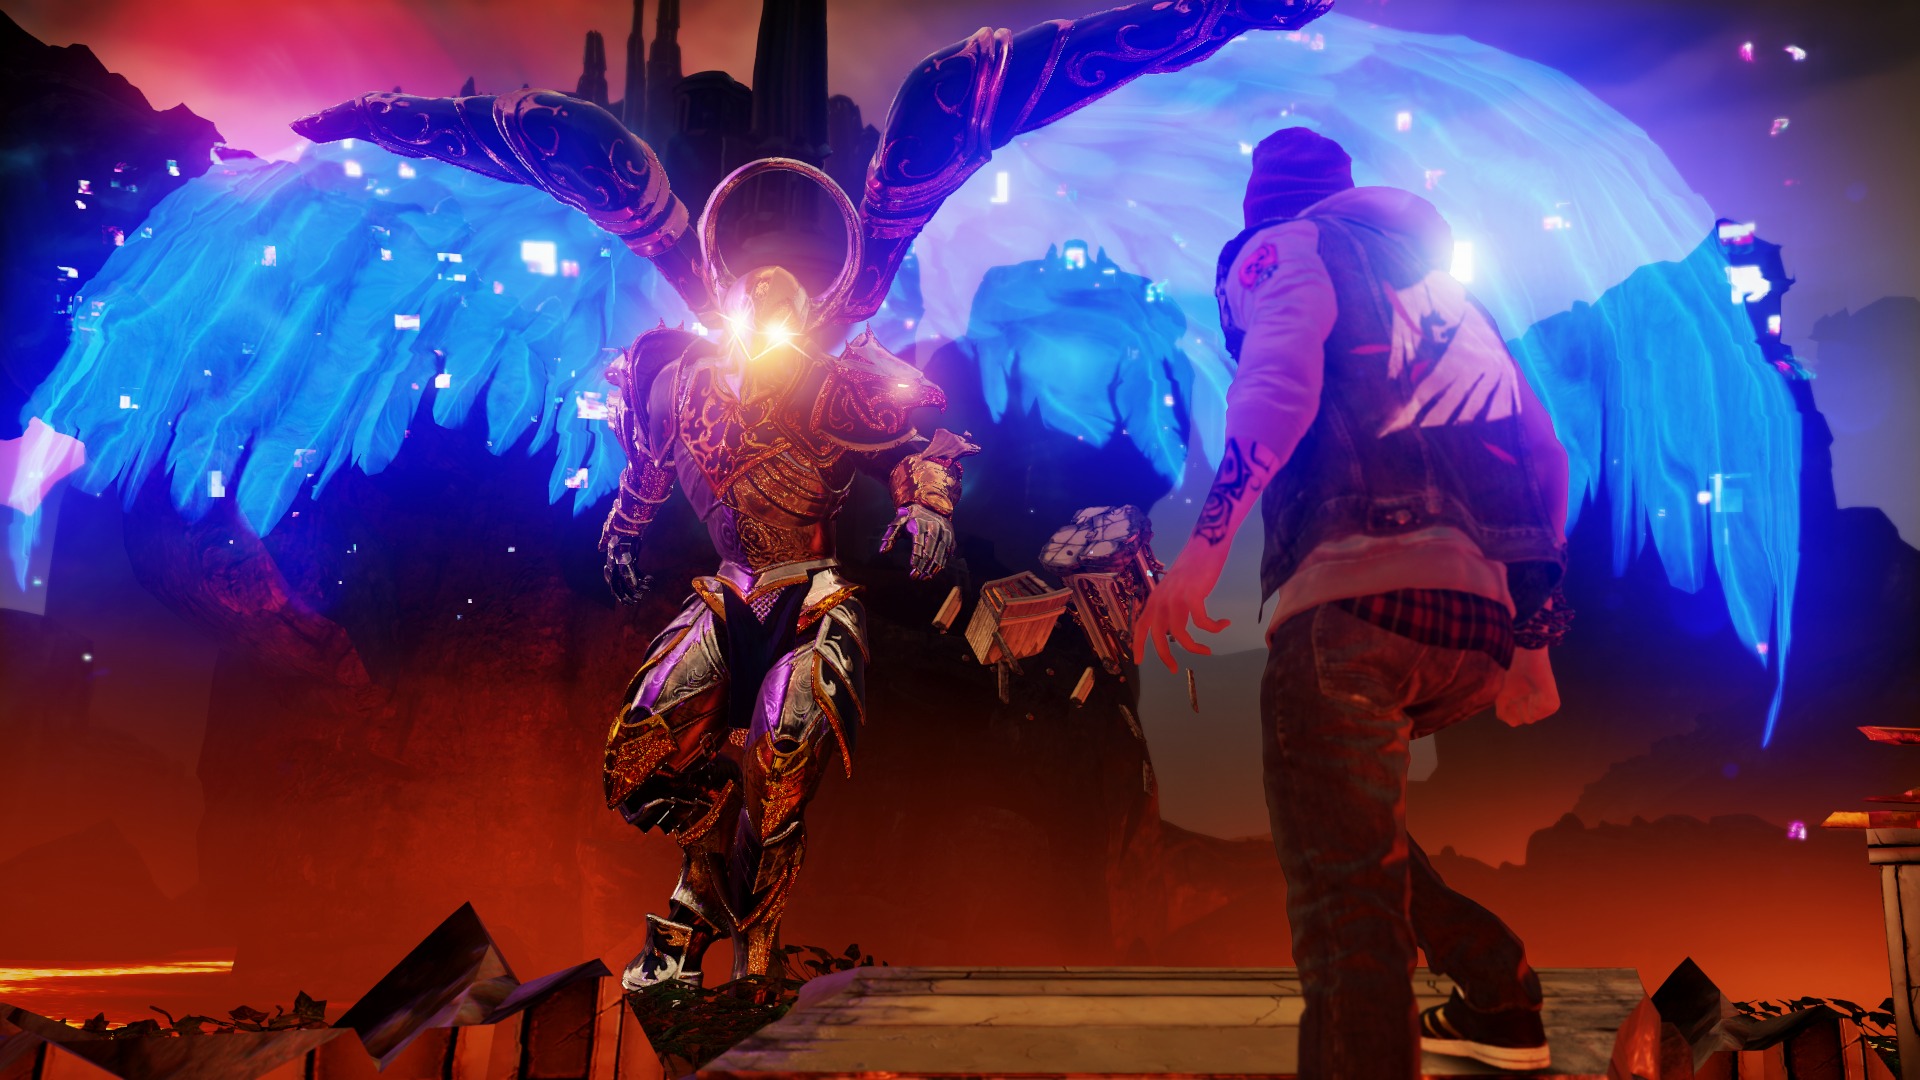 Infamous Second Son Sports Terrific Gameplay | Source: DeviantArt